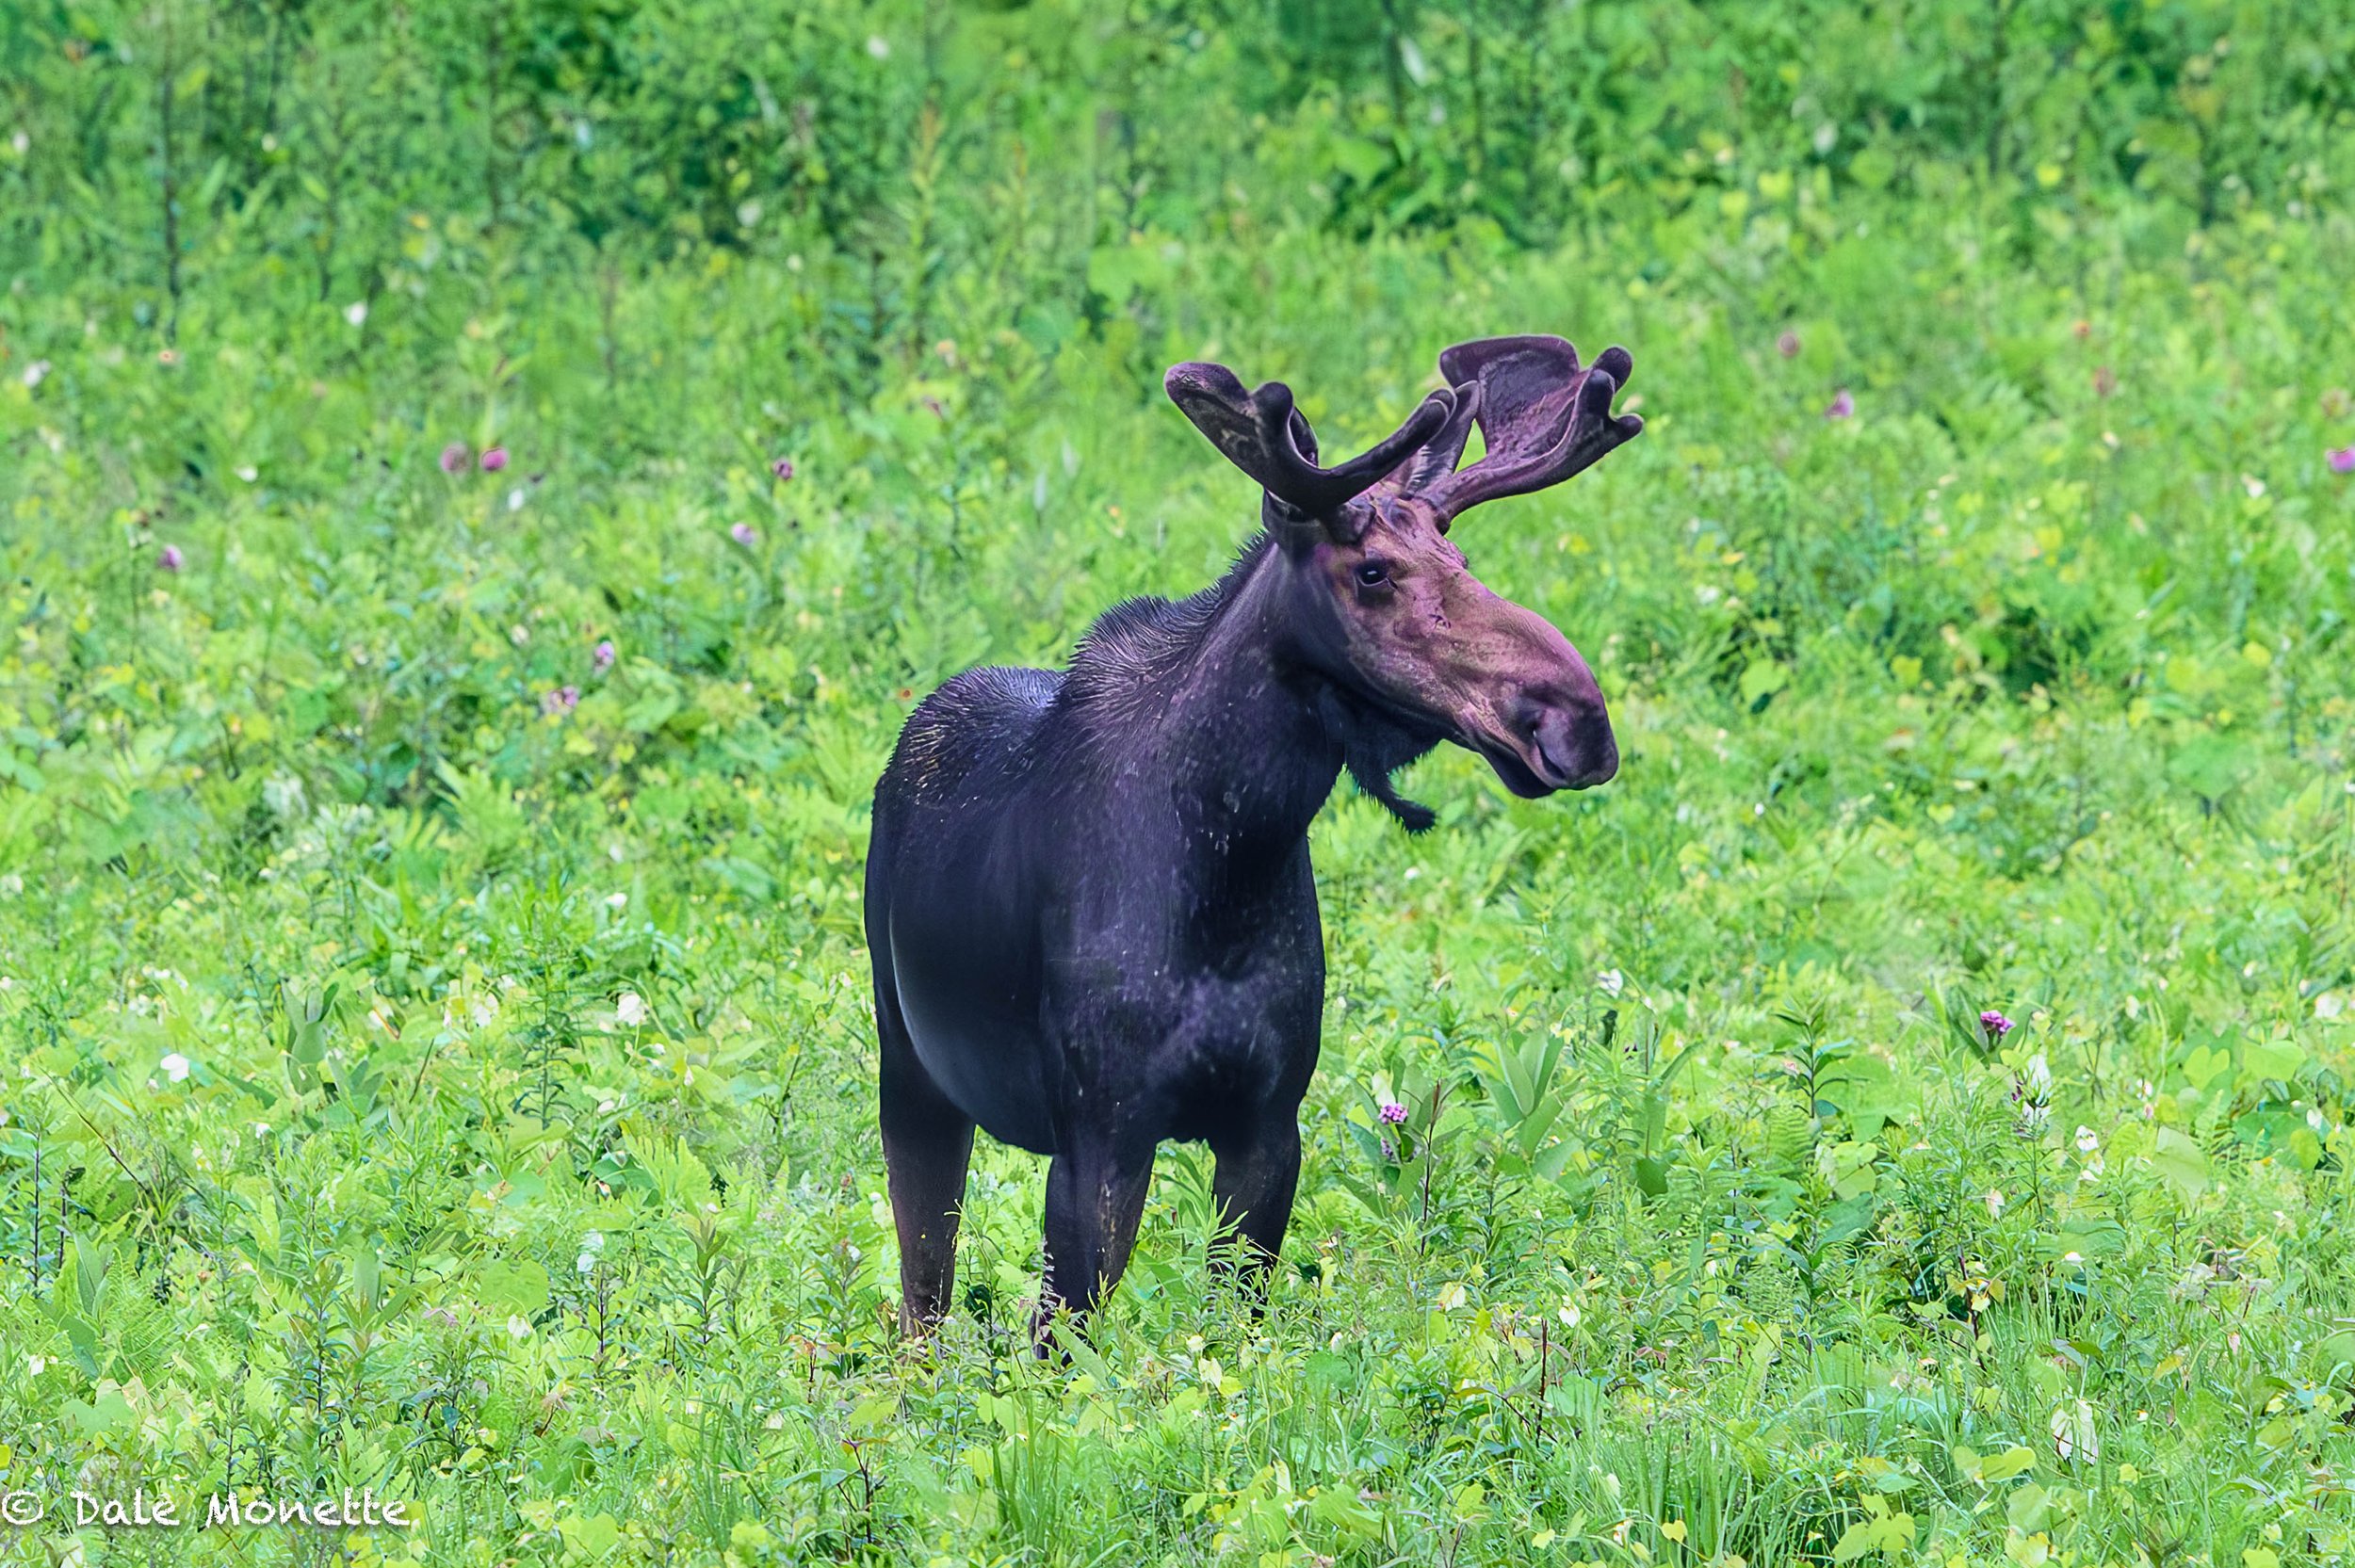   A July 4th bull moose out standing in his field!     